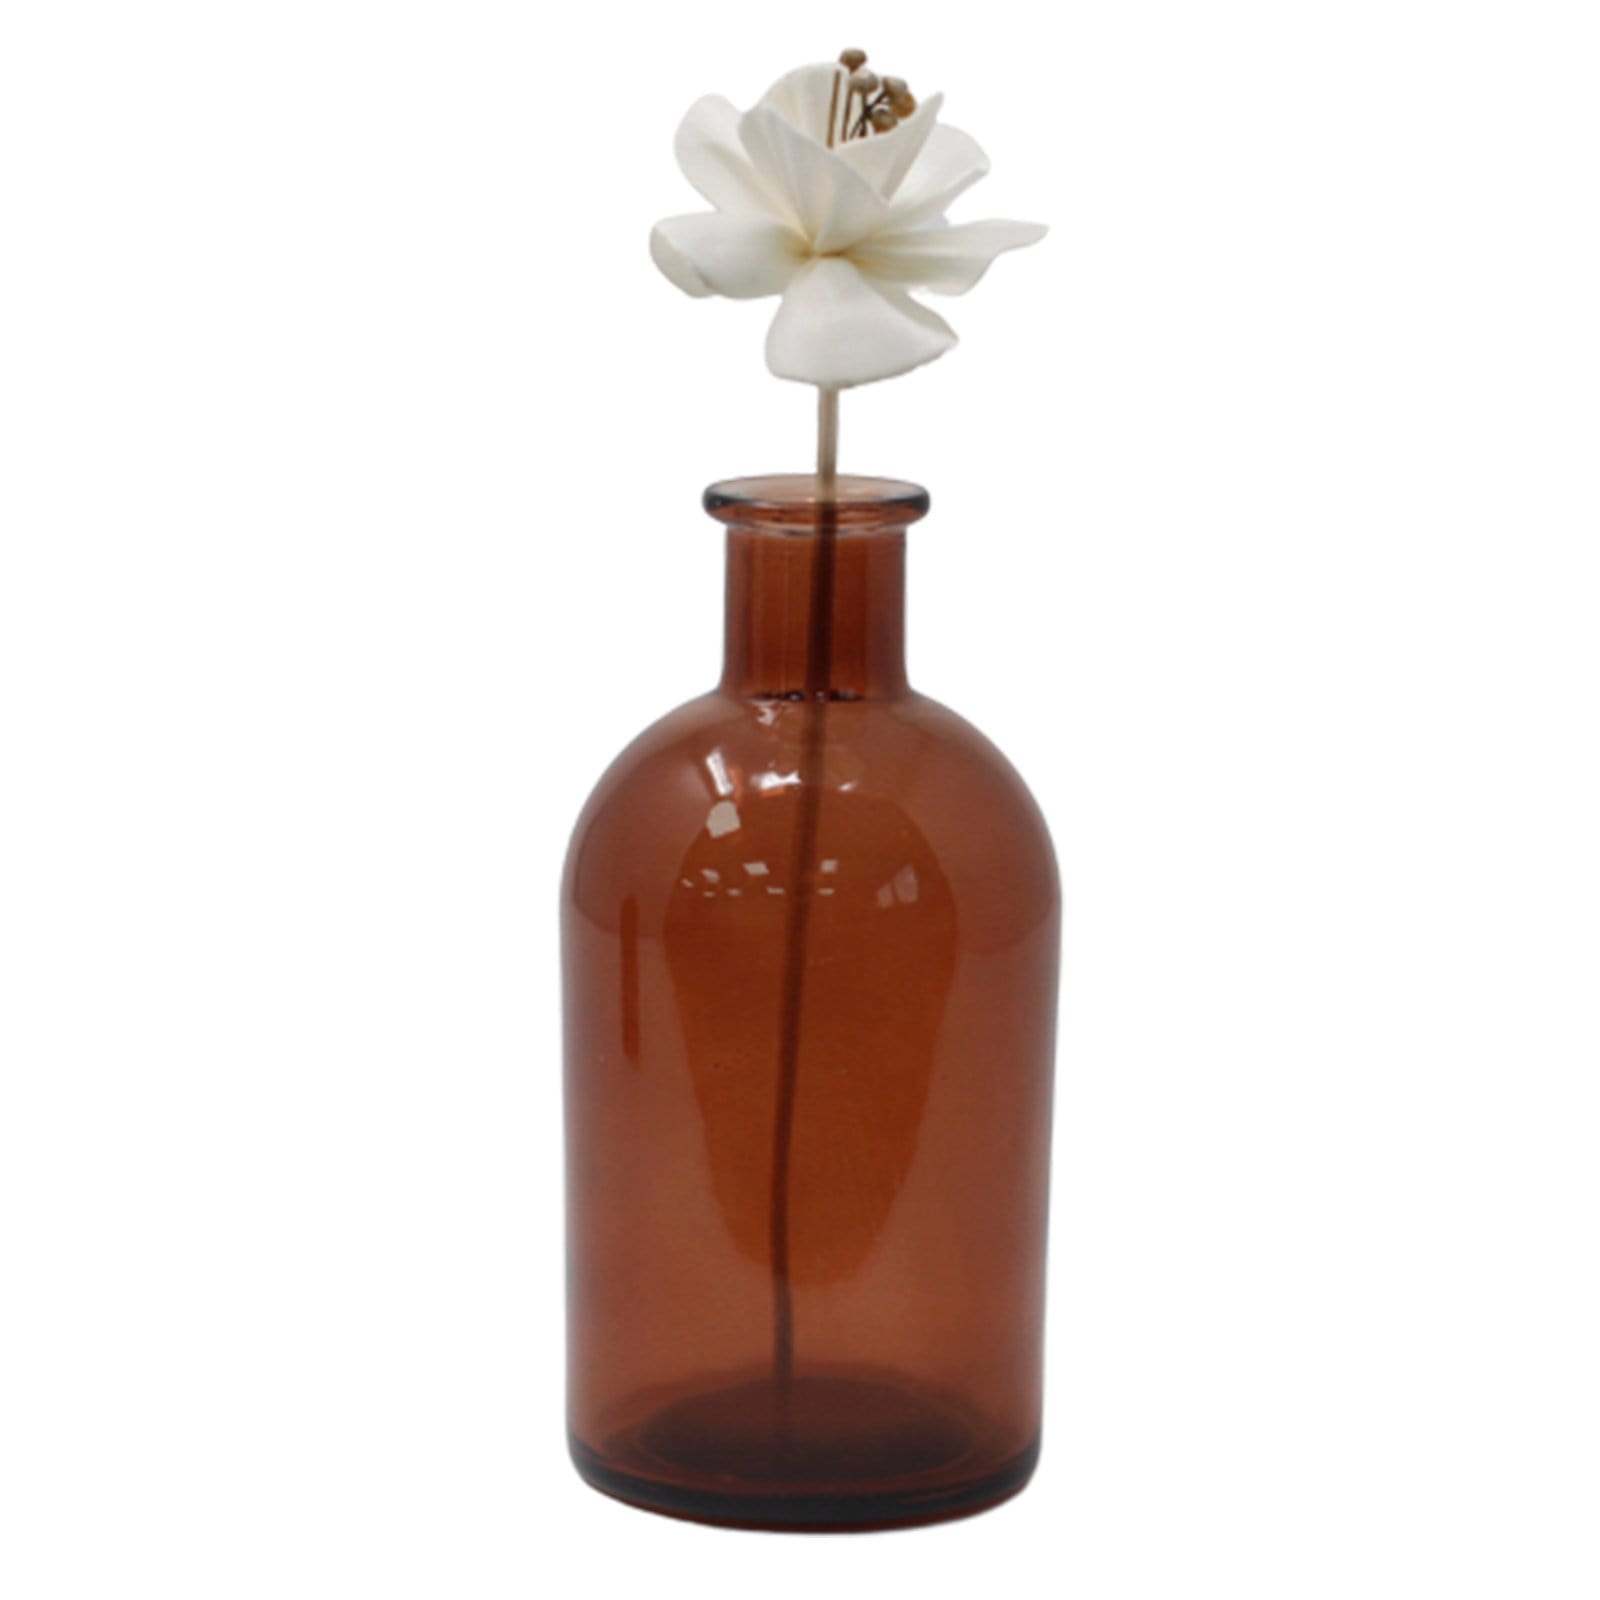 12 x Natural Diffuser Flowers on Reed - ShopGreenToday